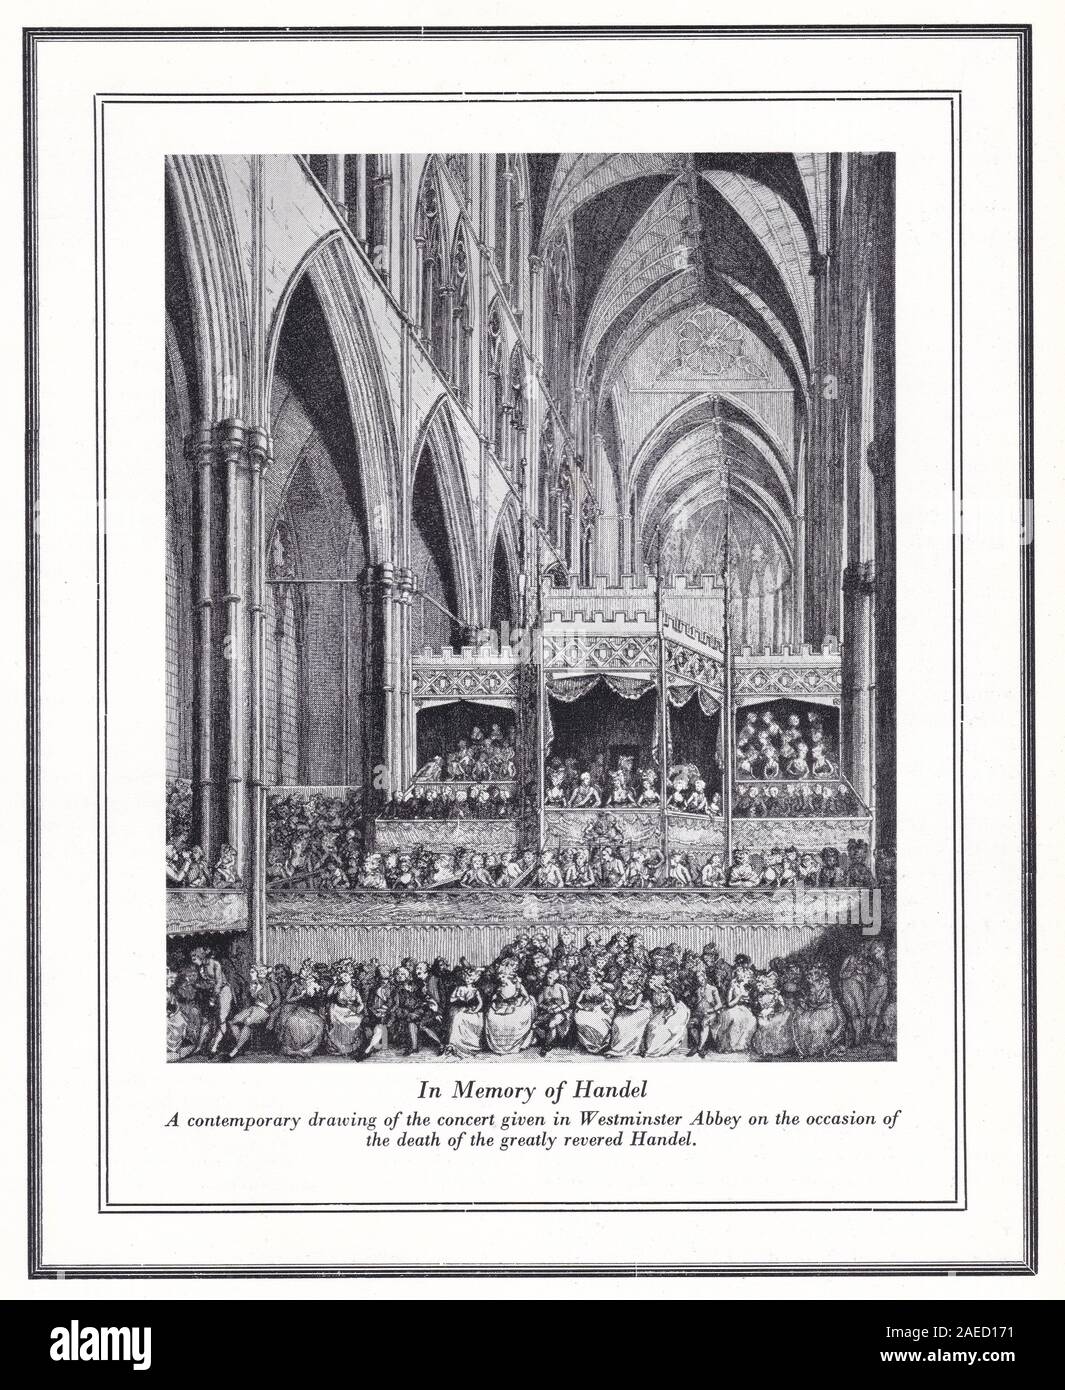 'In Memory of Handel' - A drawing of the concert given in Westminster Abbey on the occasion of the death of the greatly revered Handel. Stock Photo